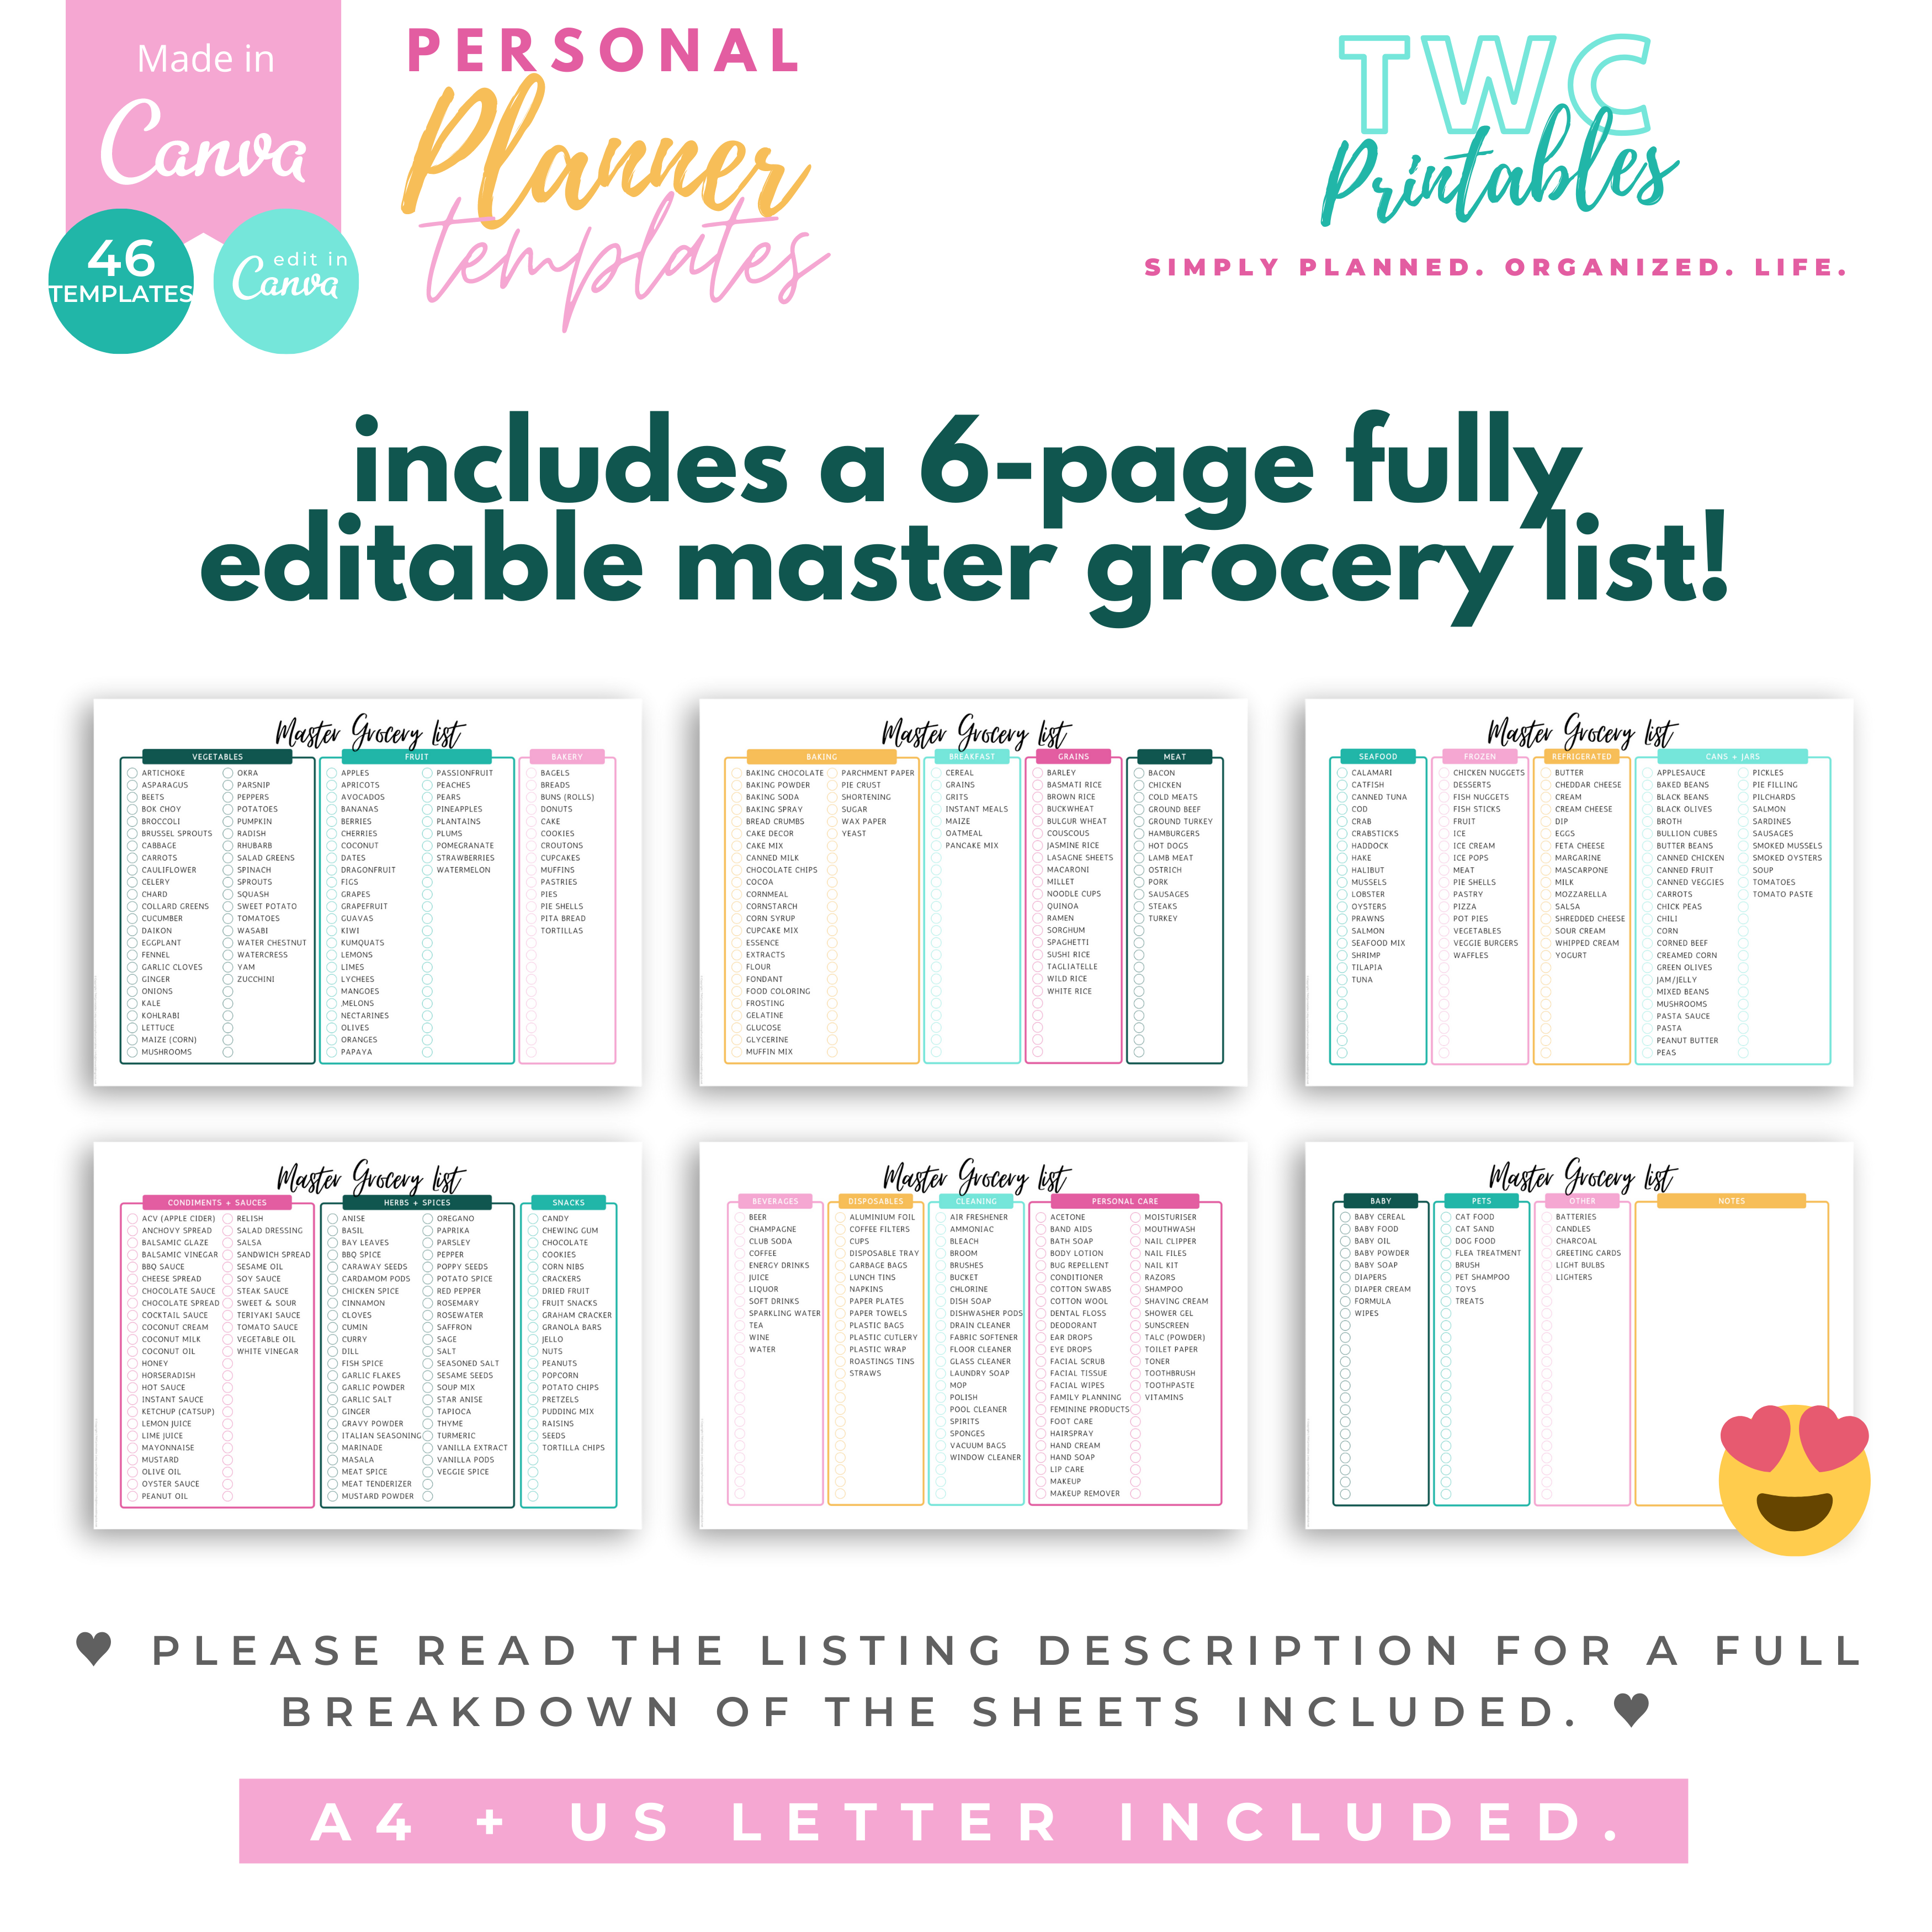 Plan your life with these handy editable personal planner templates for Canva! These sheets will help you to keep track of your favorites, finances, hobbies, meal planning and so much more! You can change everything from colors to fonts, text, elements, etc. all you need is a free Canva account.